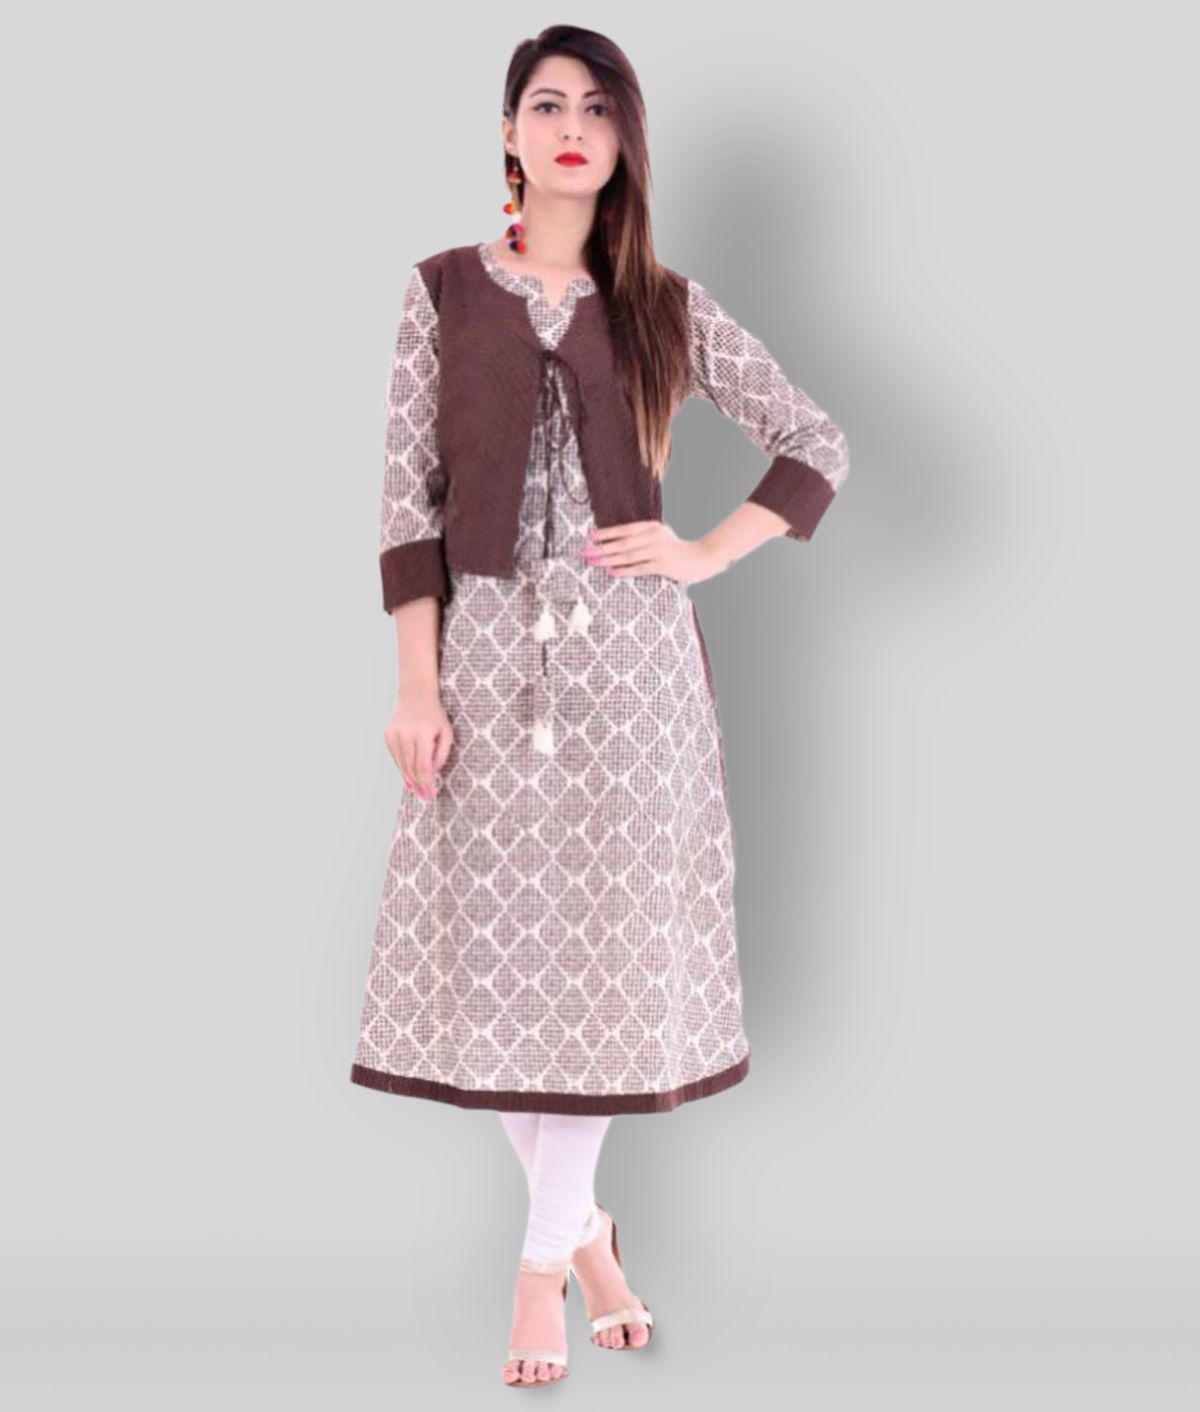     			Yash Gallery - Brown Cotton Women's Jacket Style Kurti ( Pack of 1 )